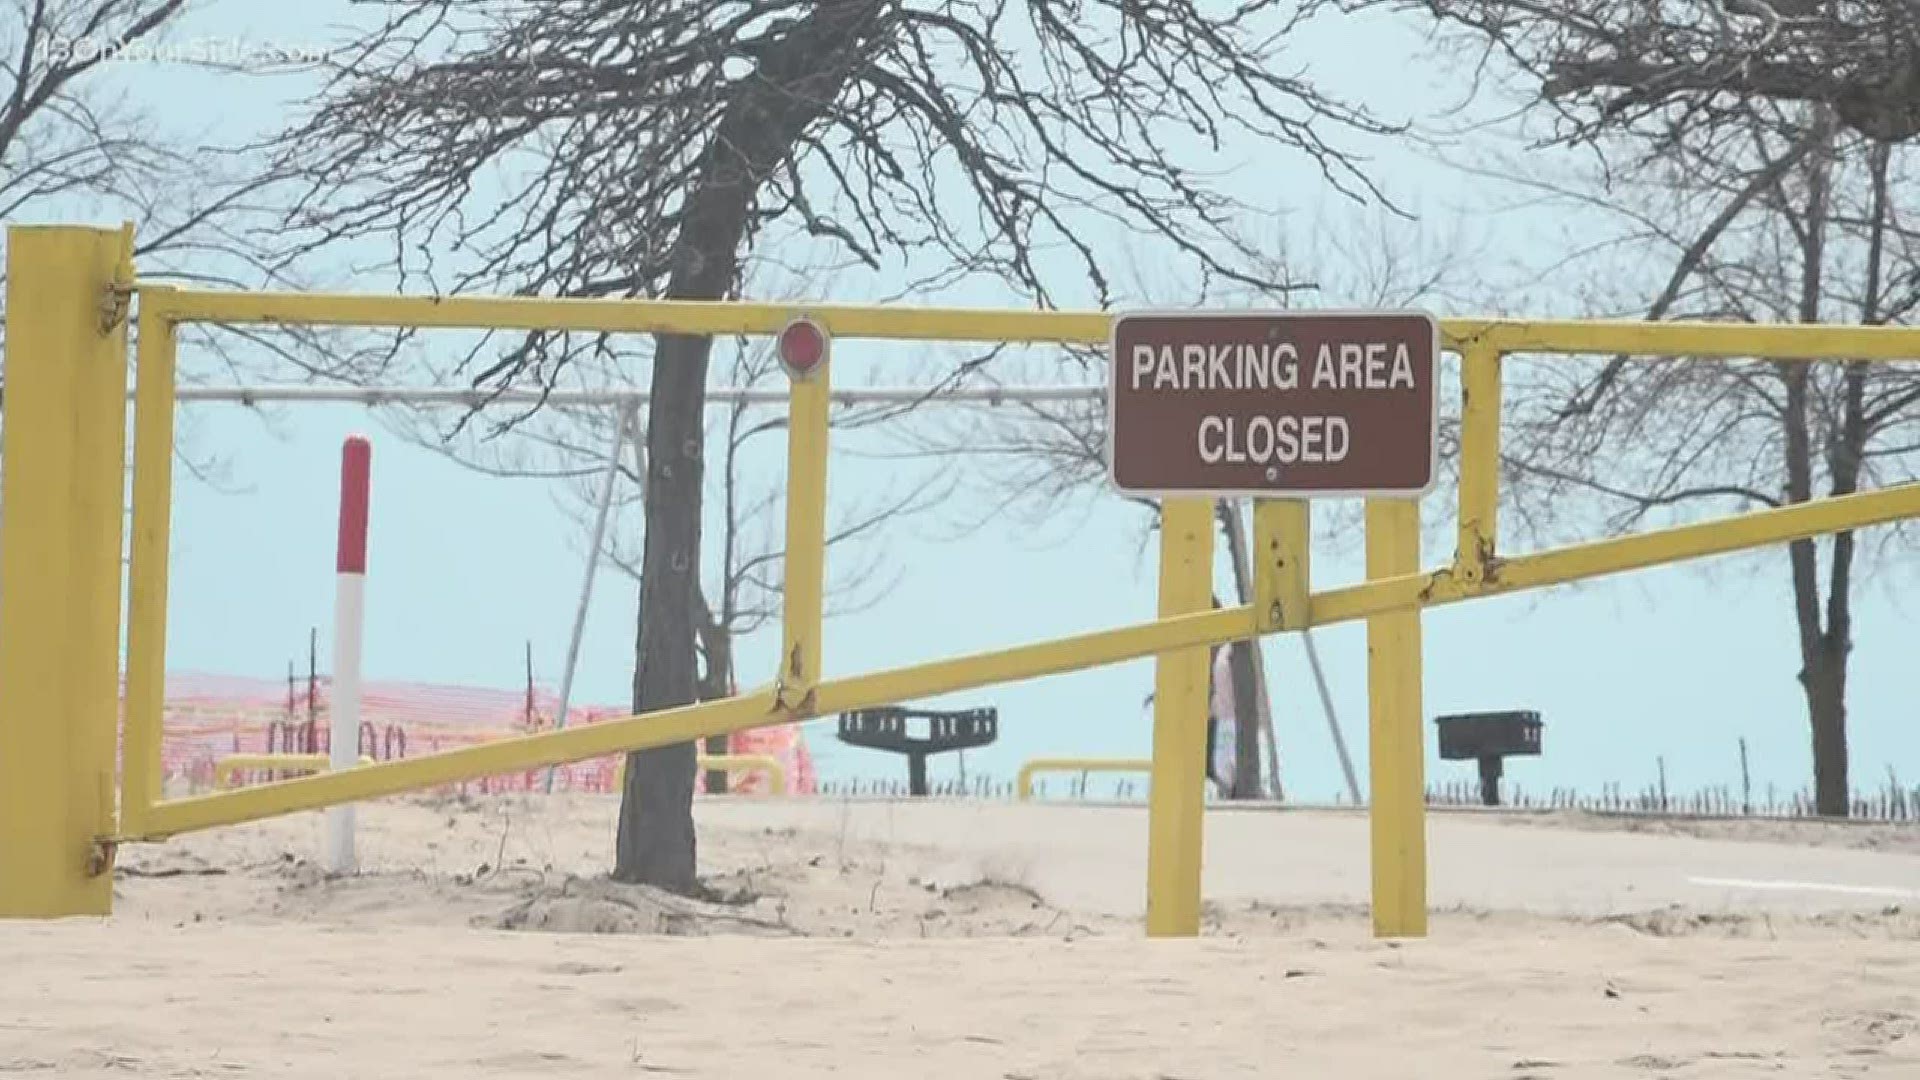 The city closed the parking lots on Sunday, May 3 to keep crowds from gathering on the beach.